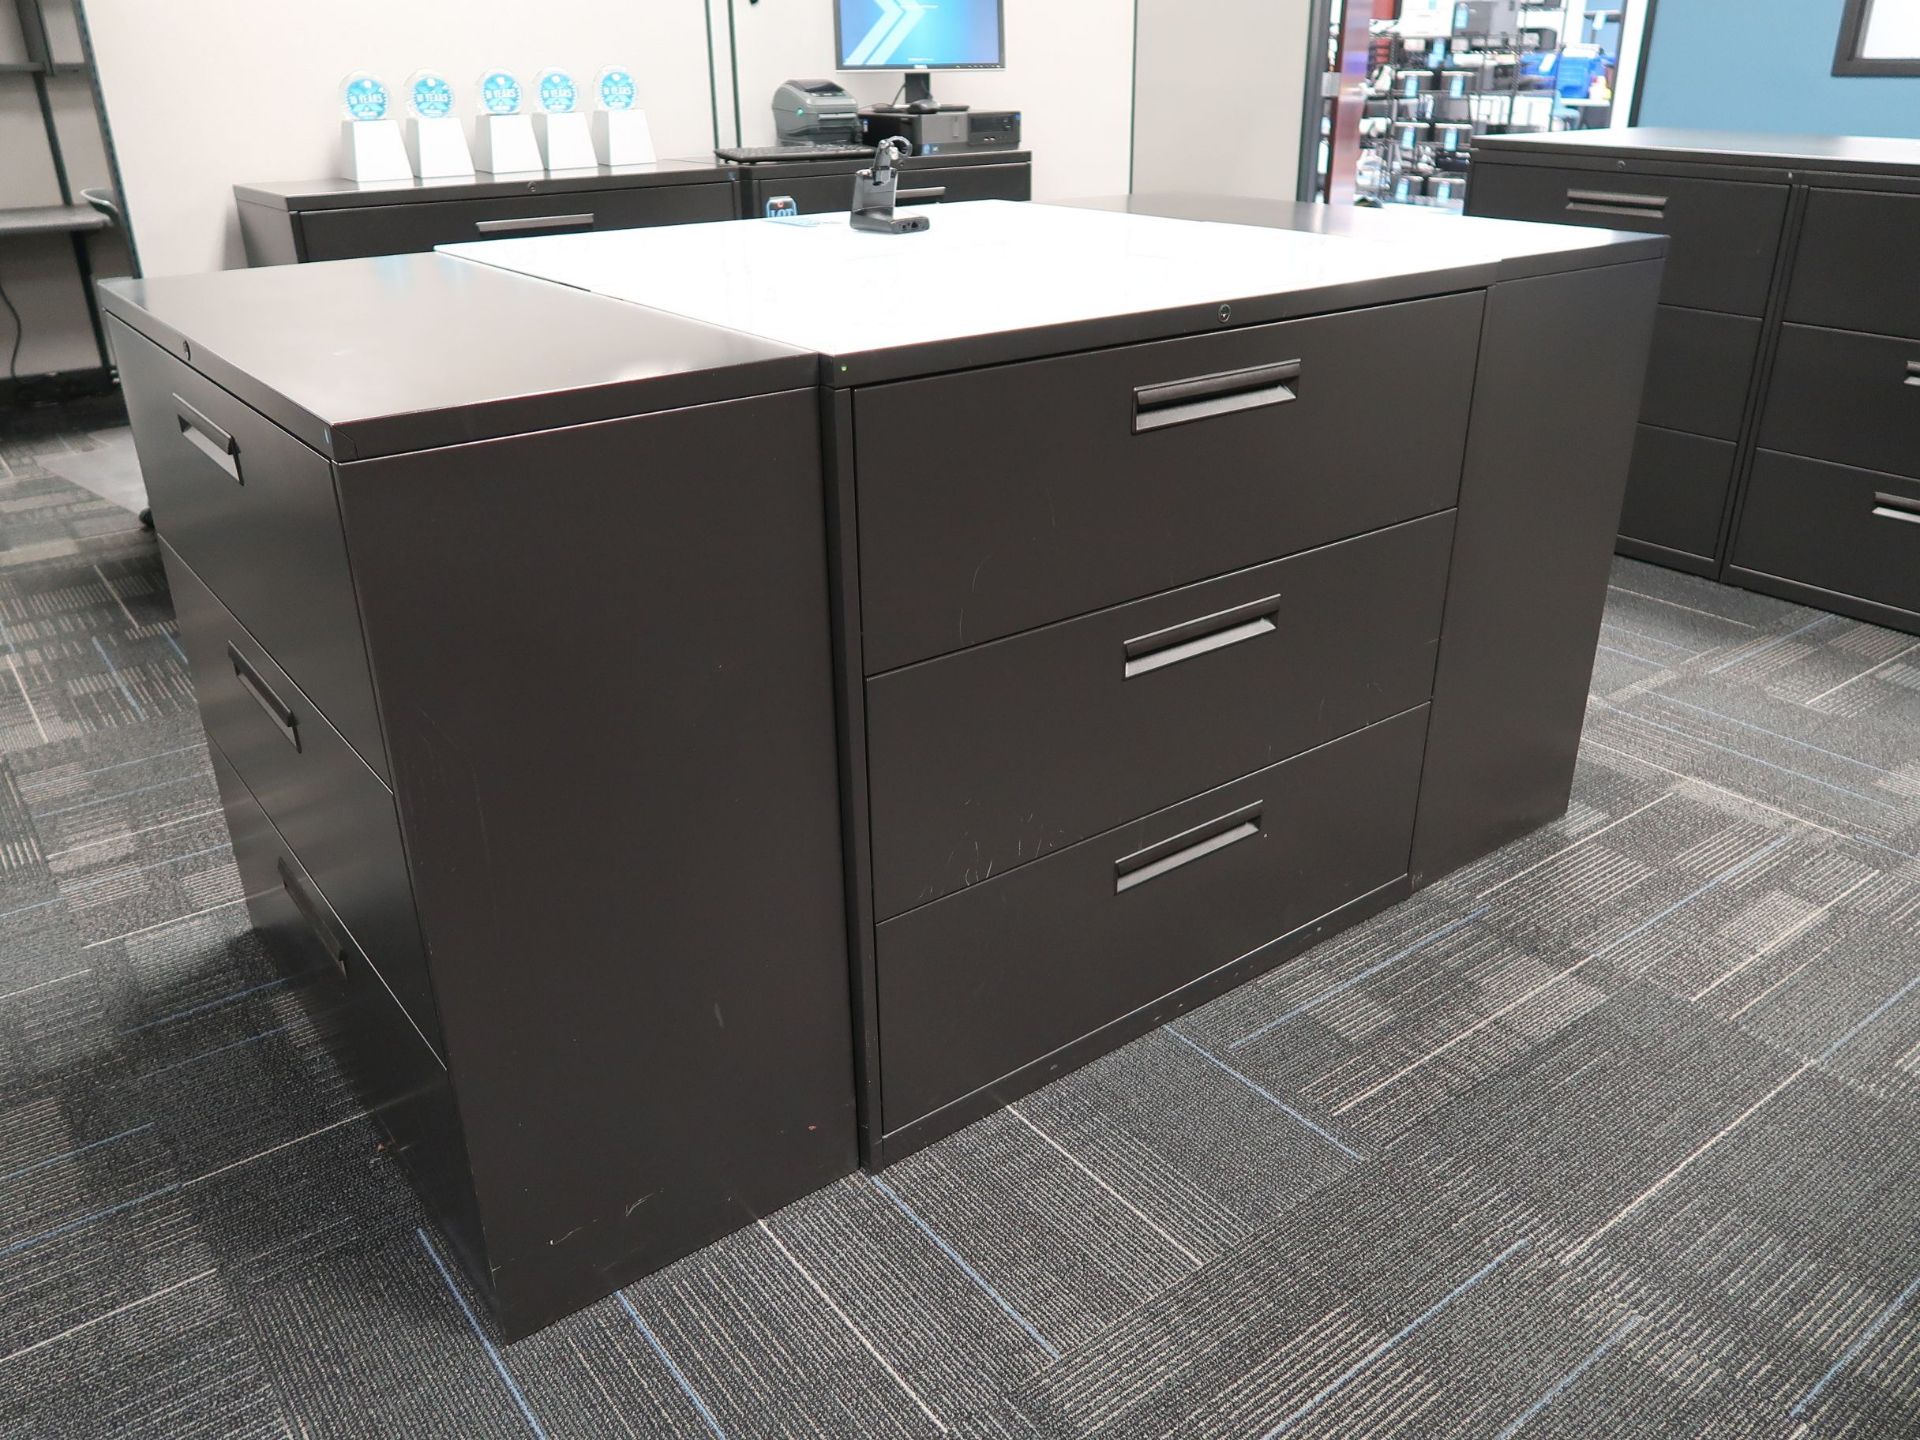 42" WIDE THREE-DRAWER BLACK LATERAL FILE CABINETS - Image 2 of 2